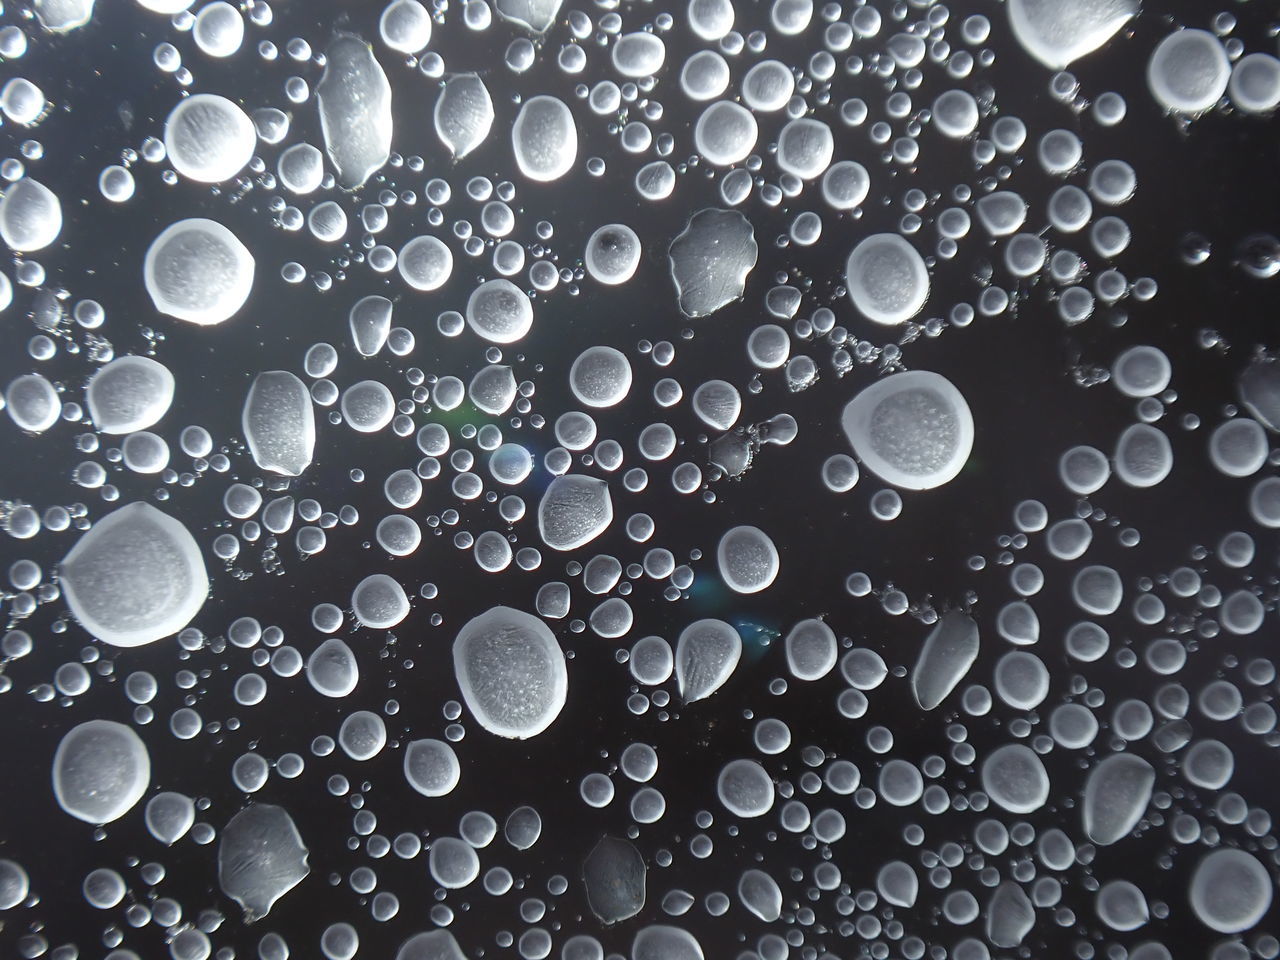 CLOSE-UP OF BUBBLES IN WATER